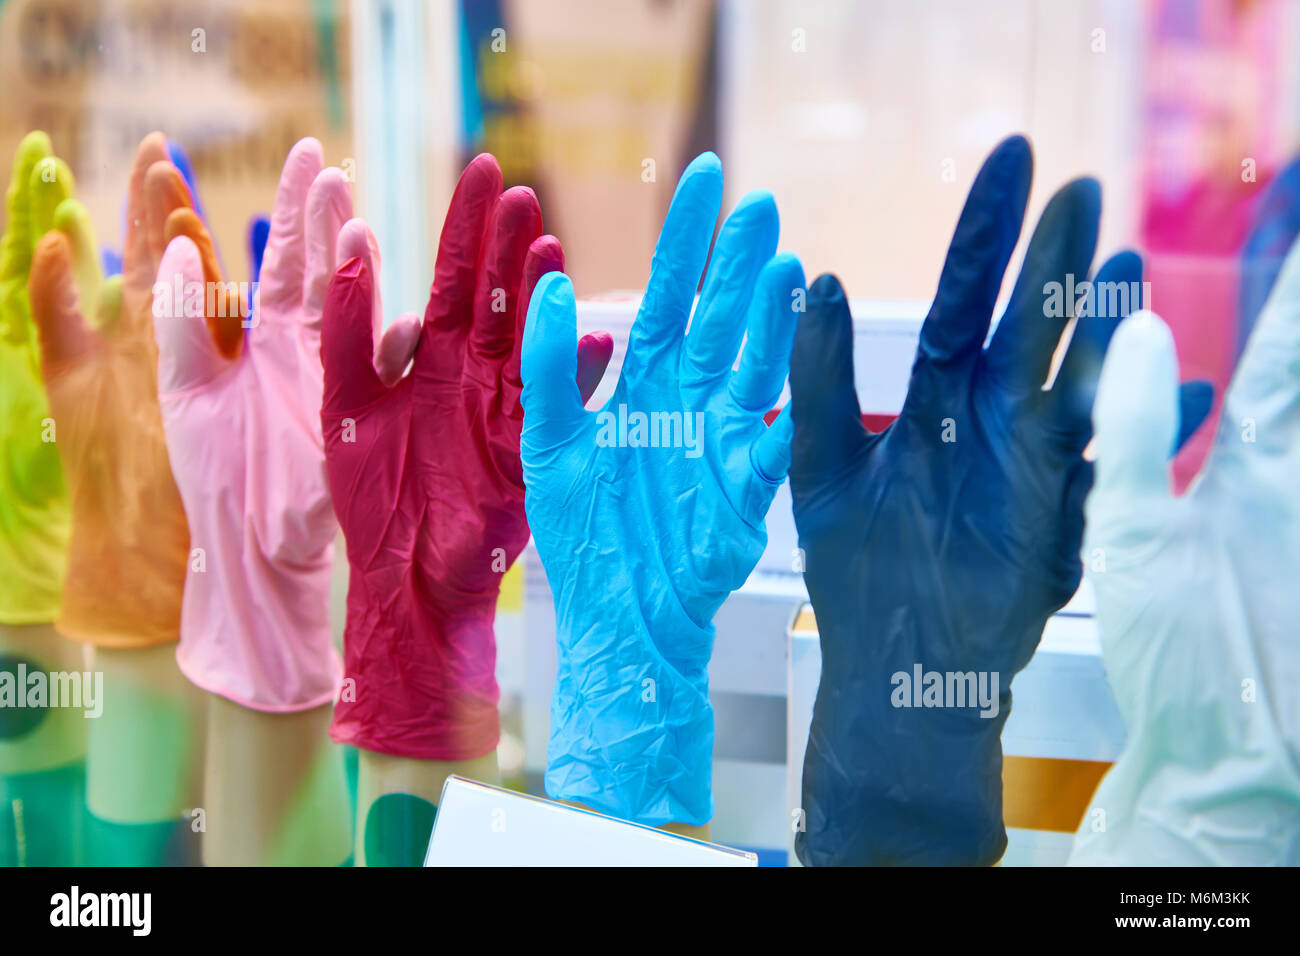 Colorful medical rubber gloves Stock Photo